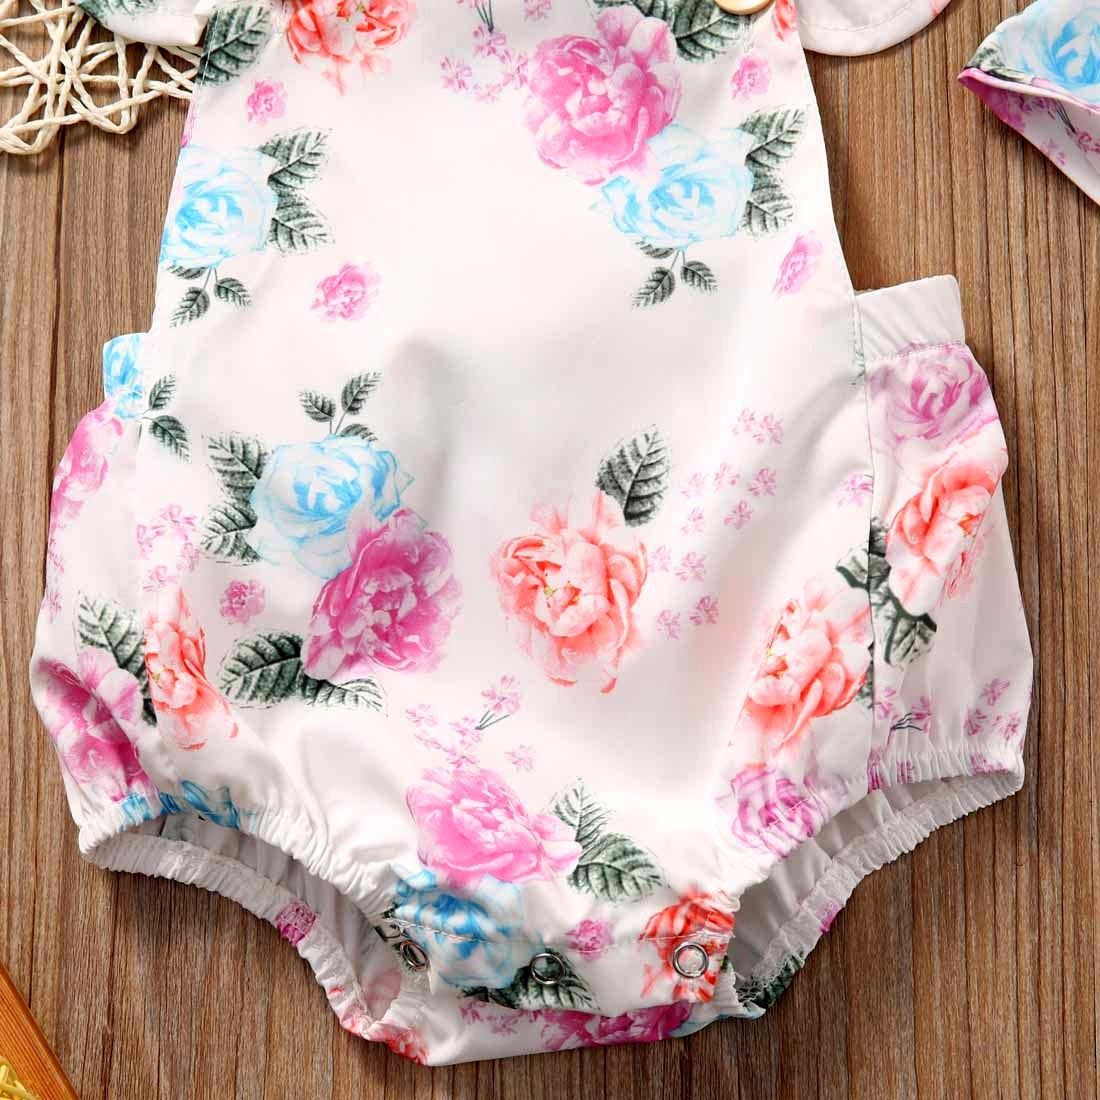 Floral Romper with Headband